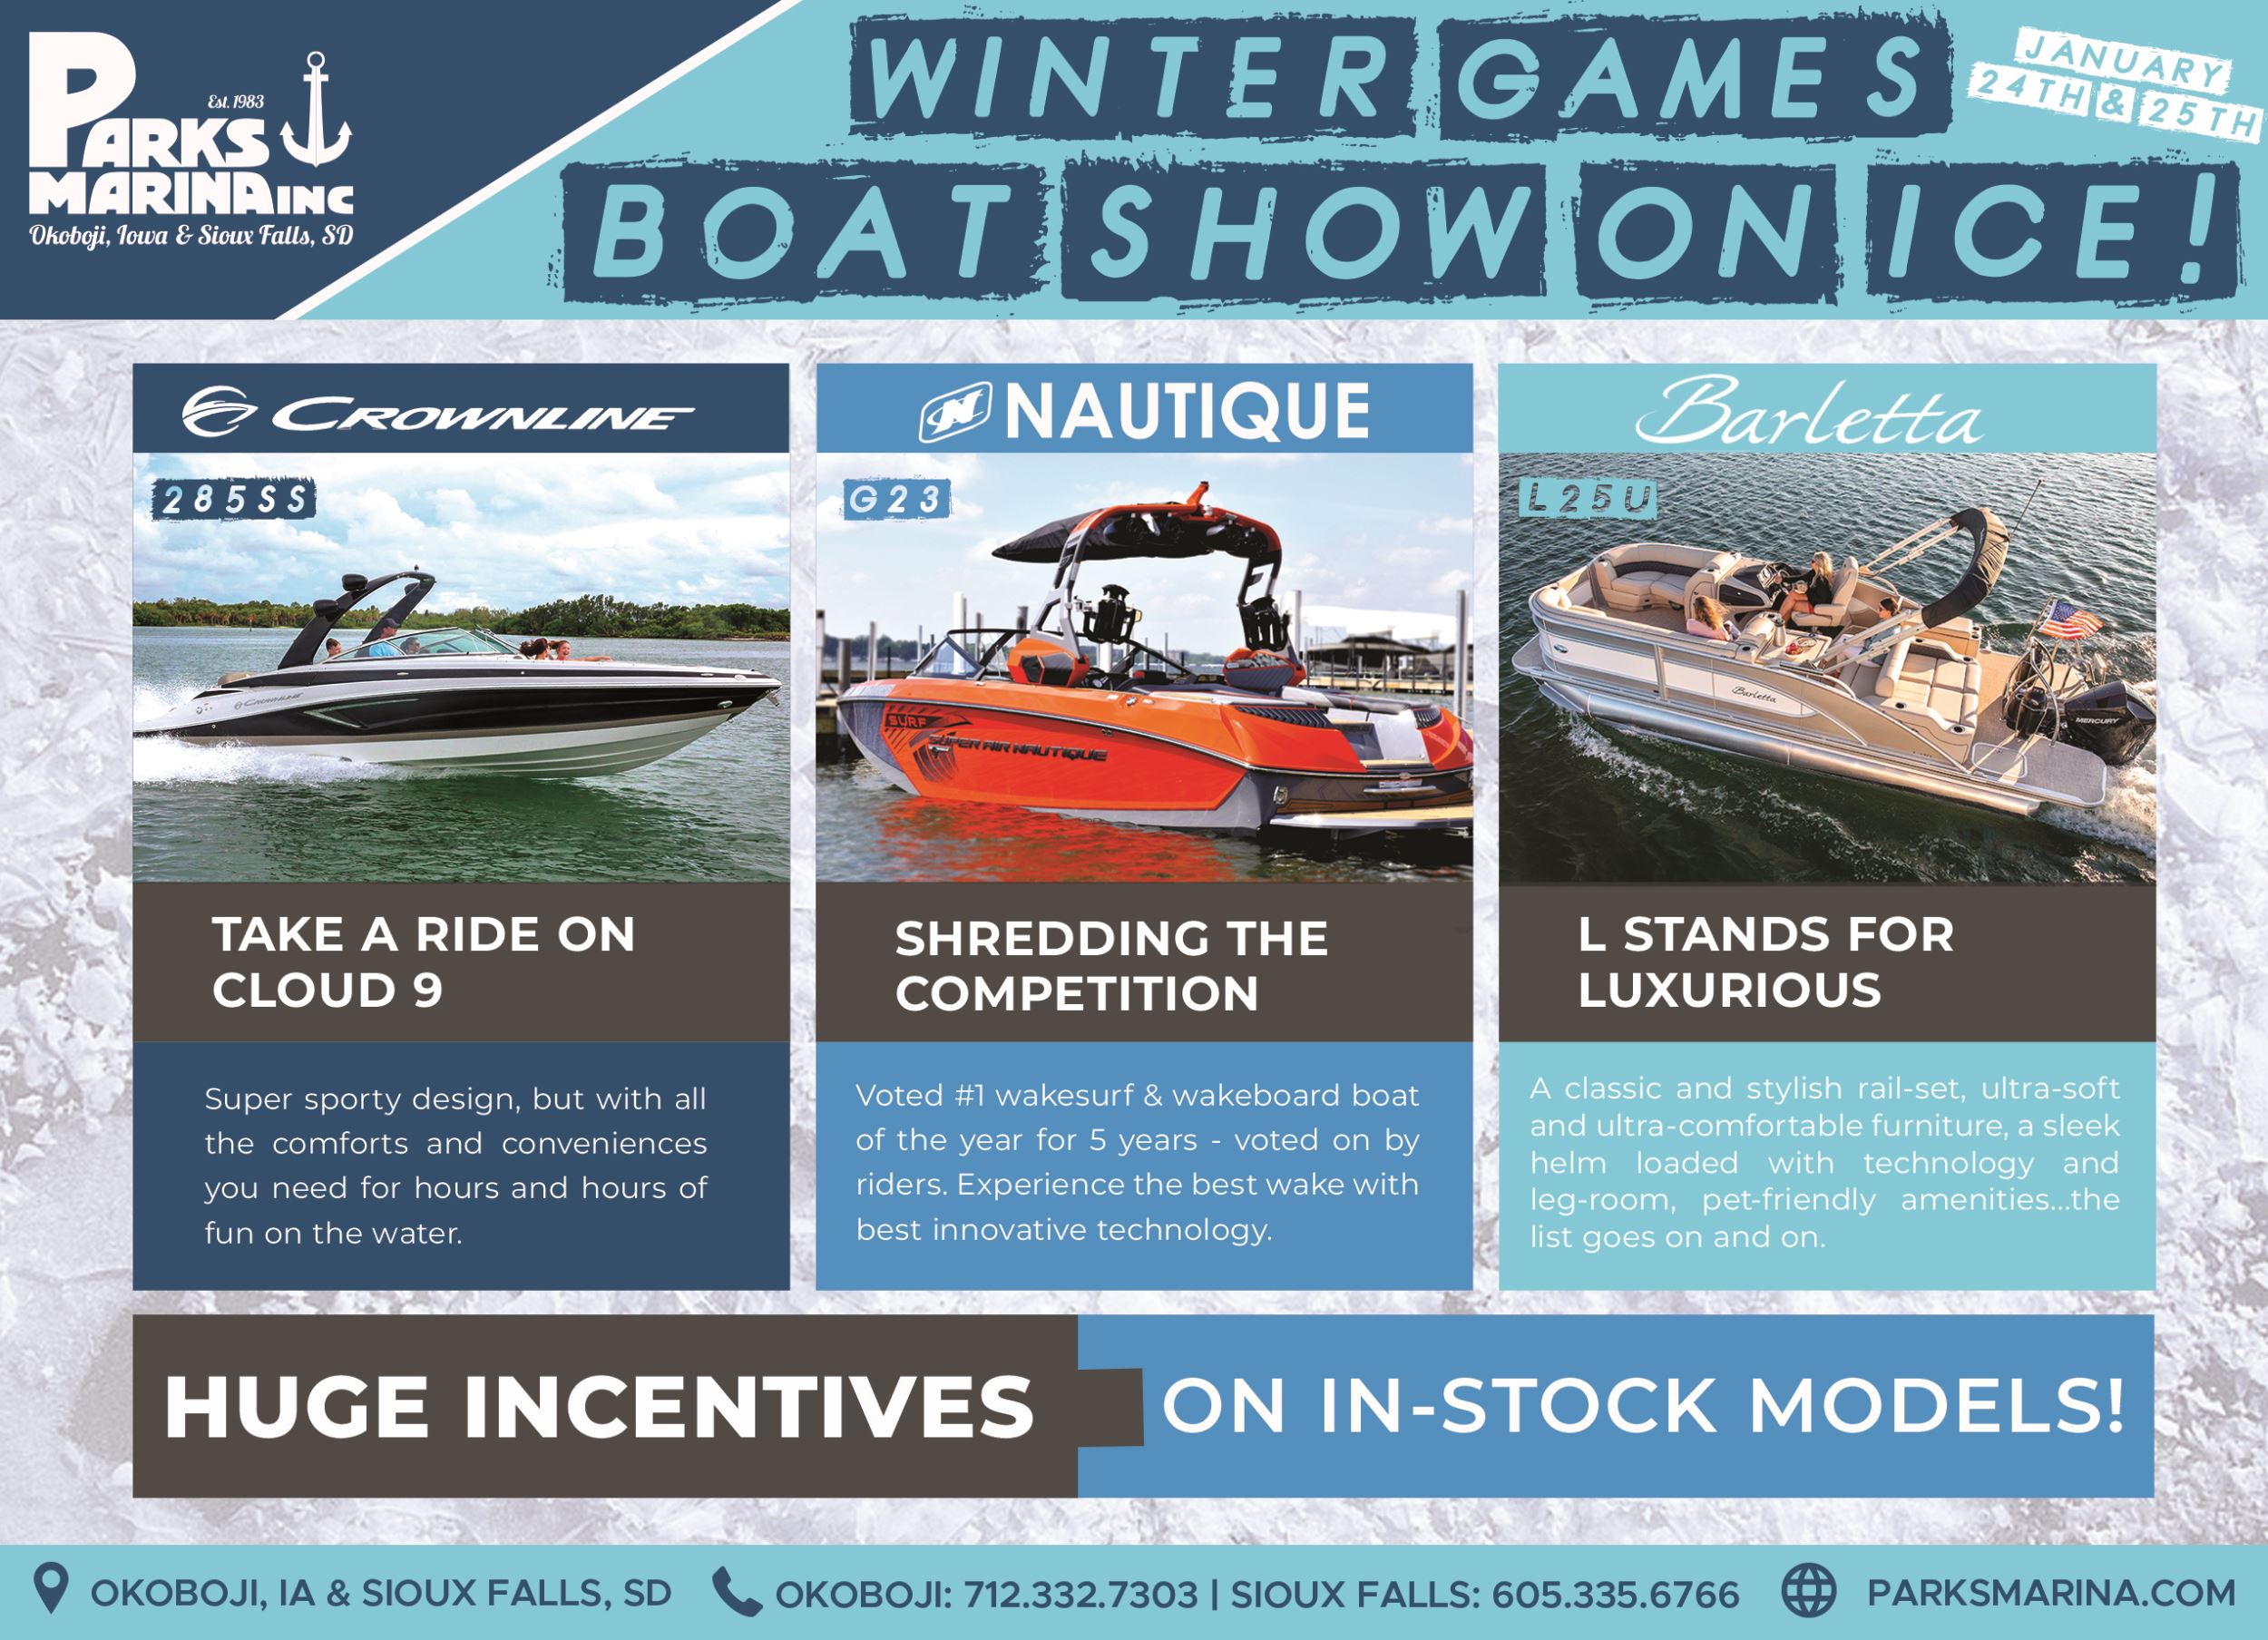 Boats on Ice Boat Show mean big incentives during Winter Games